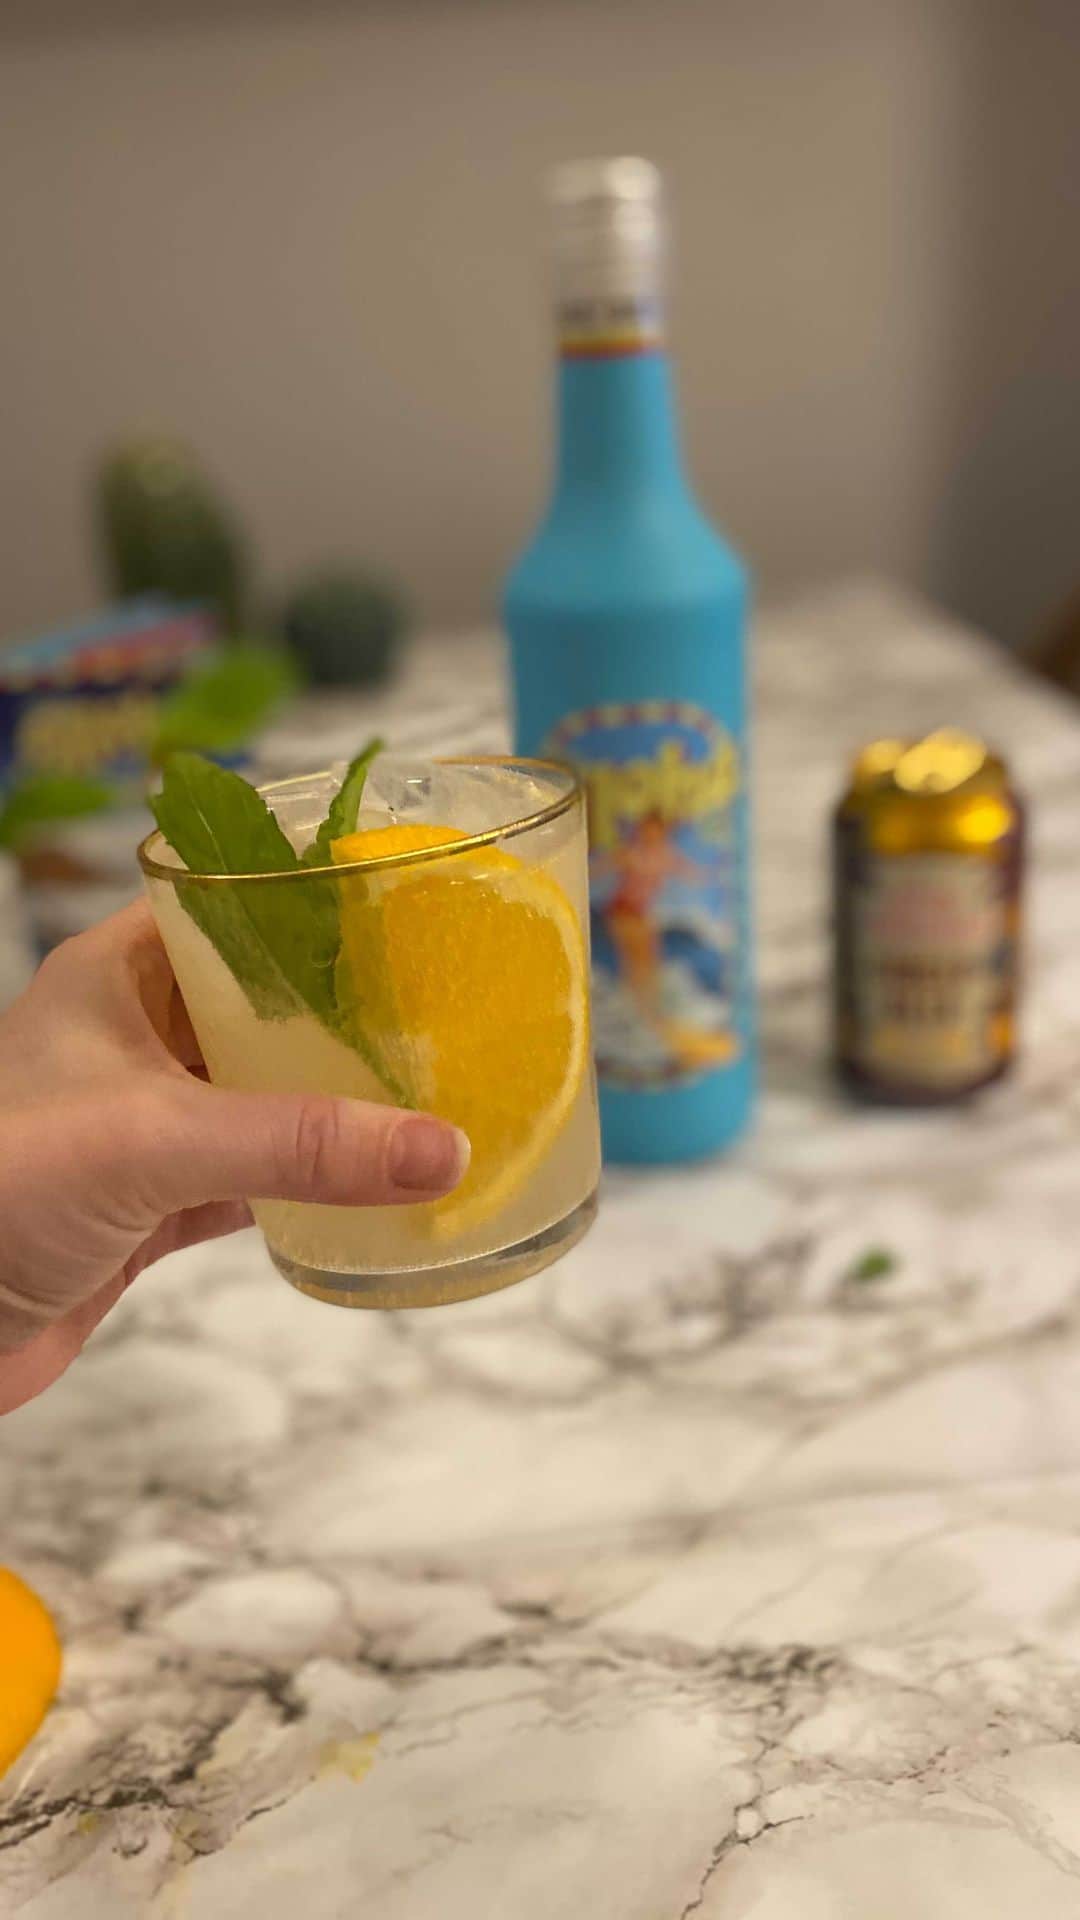 Eat With Steph & Coのインスタグラム：「Cocktail night courtesy of @alohasixtyfive 🍹   I tried The Alohan - perfect drink to make me imagine I’m on the beach and not in a rainy London! 🏝   Aloha 65 is a fresh pineapple, ginger and chilli infused spirit that tastes of summertime ☀️   Gifted PR product  #aloha65 #aloha65drinks #cocktails #friyay #cocktailnight #summerlovin #drinkme #pineapple #aloha #sunshineinabottle」